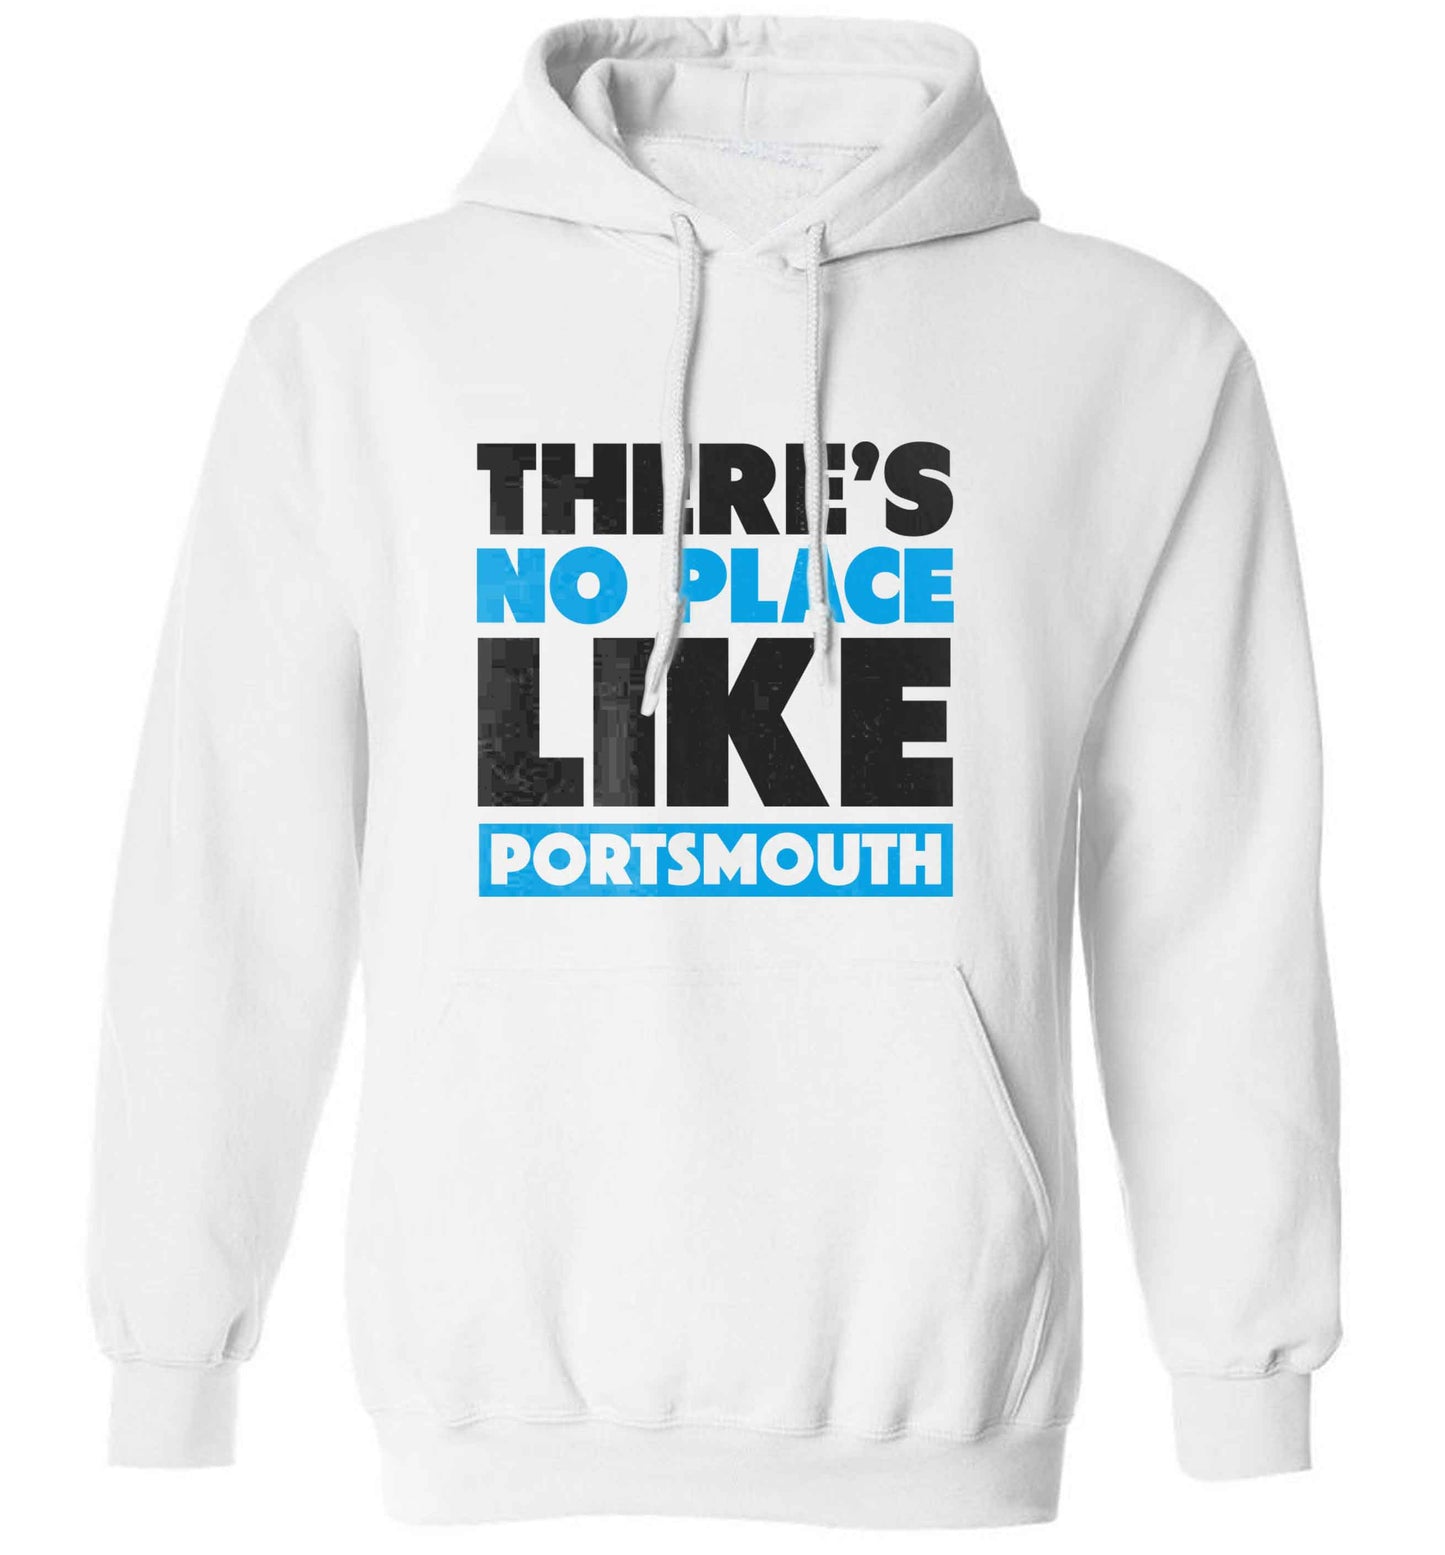 There's no place like Porstmouth adults unisex white hoodie 2XL